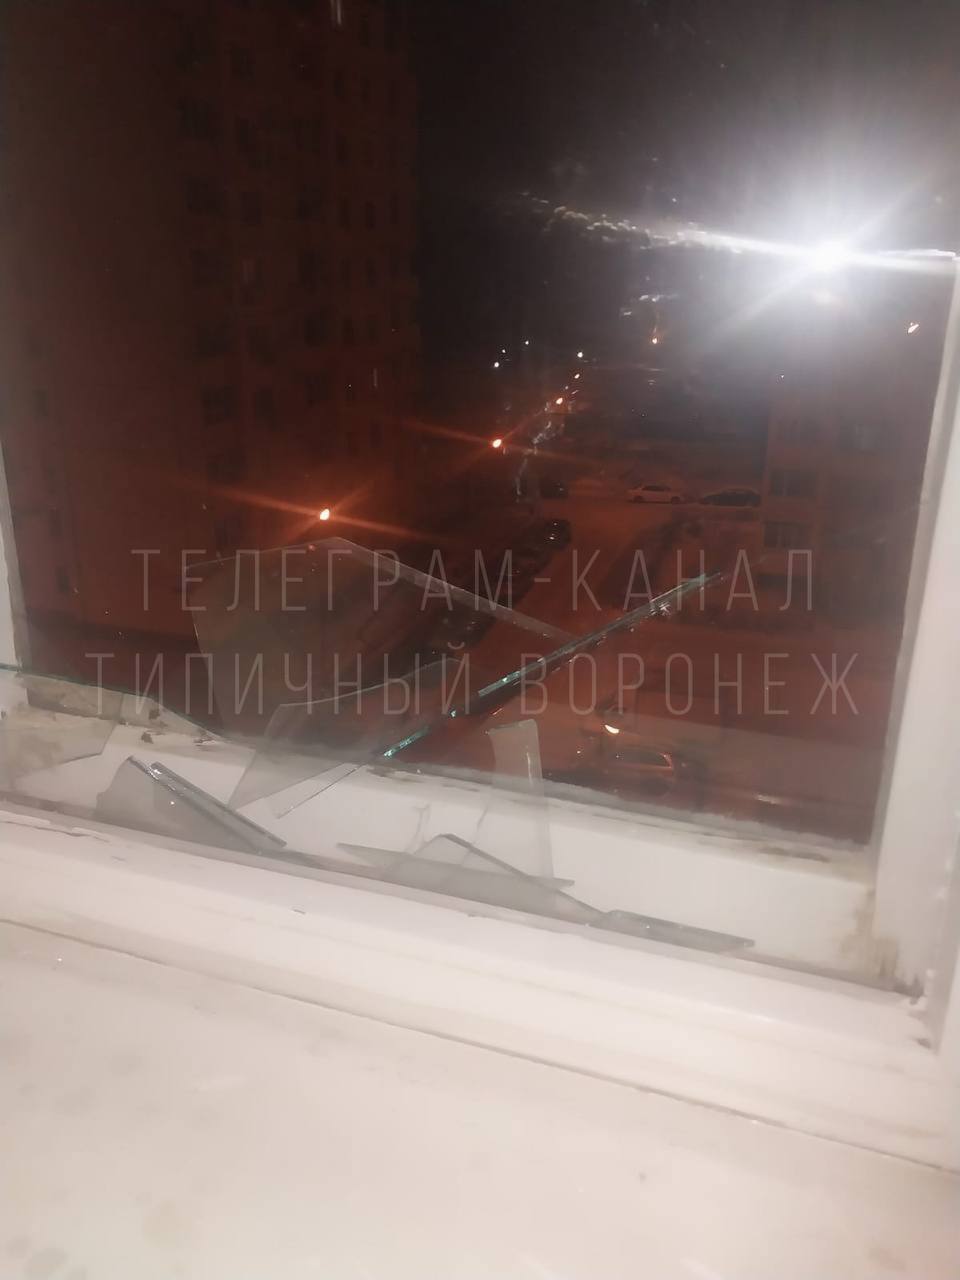 A series of explosions were heard in the Russian city of Voronezh: the city was attacked by UAVs. Photos and video